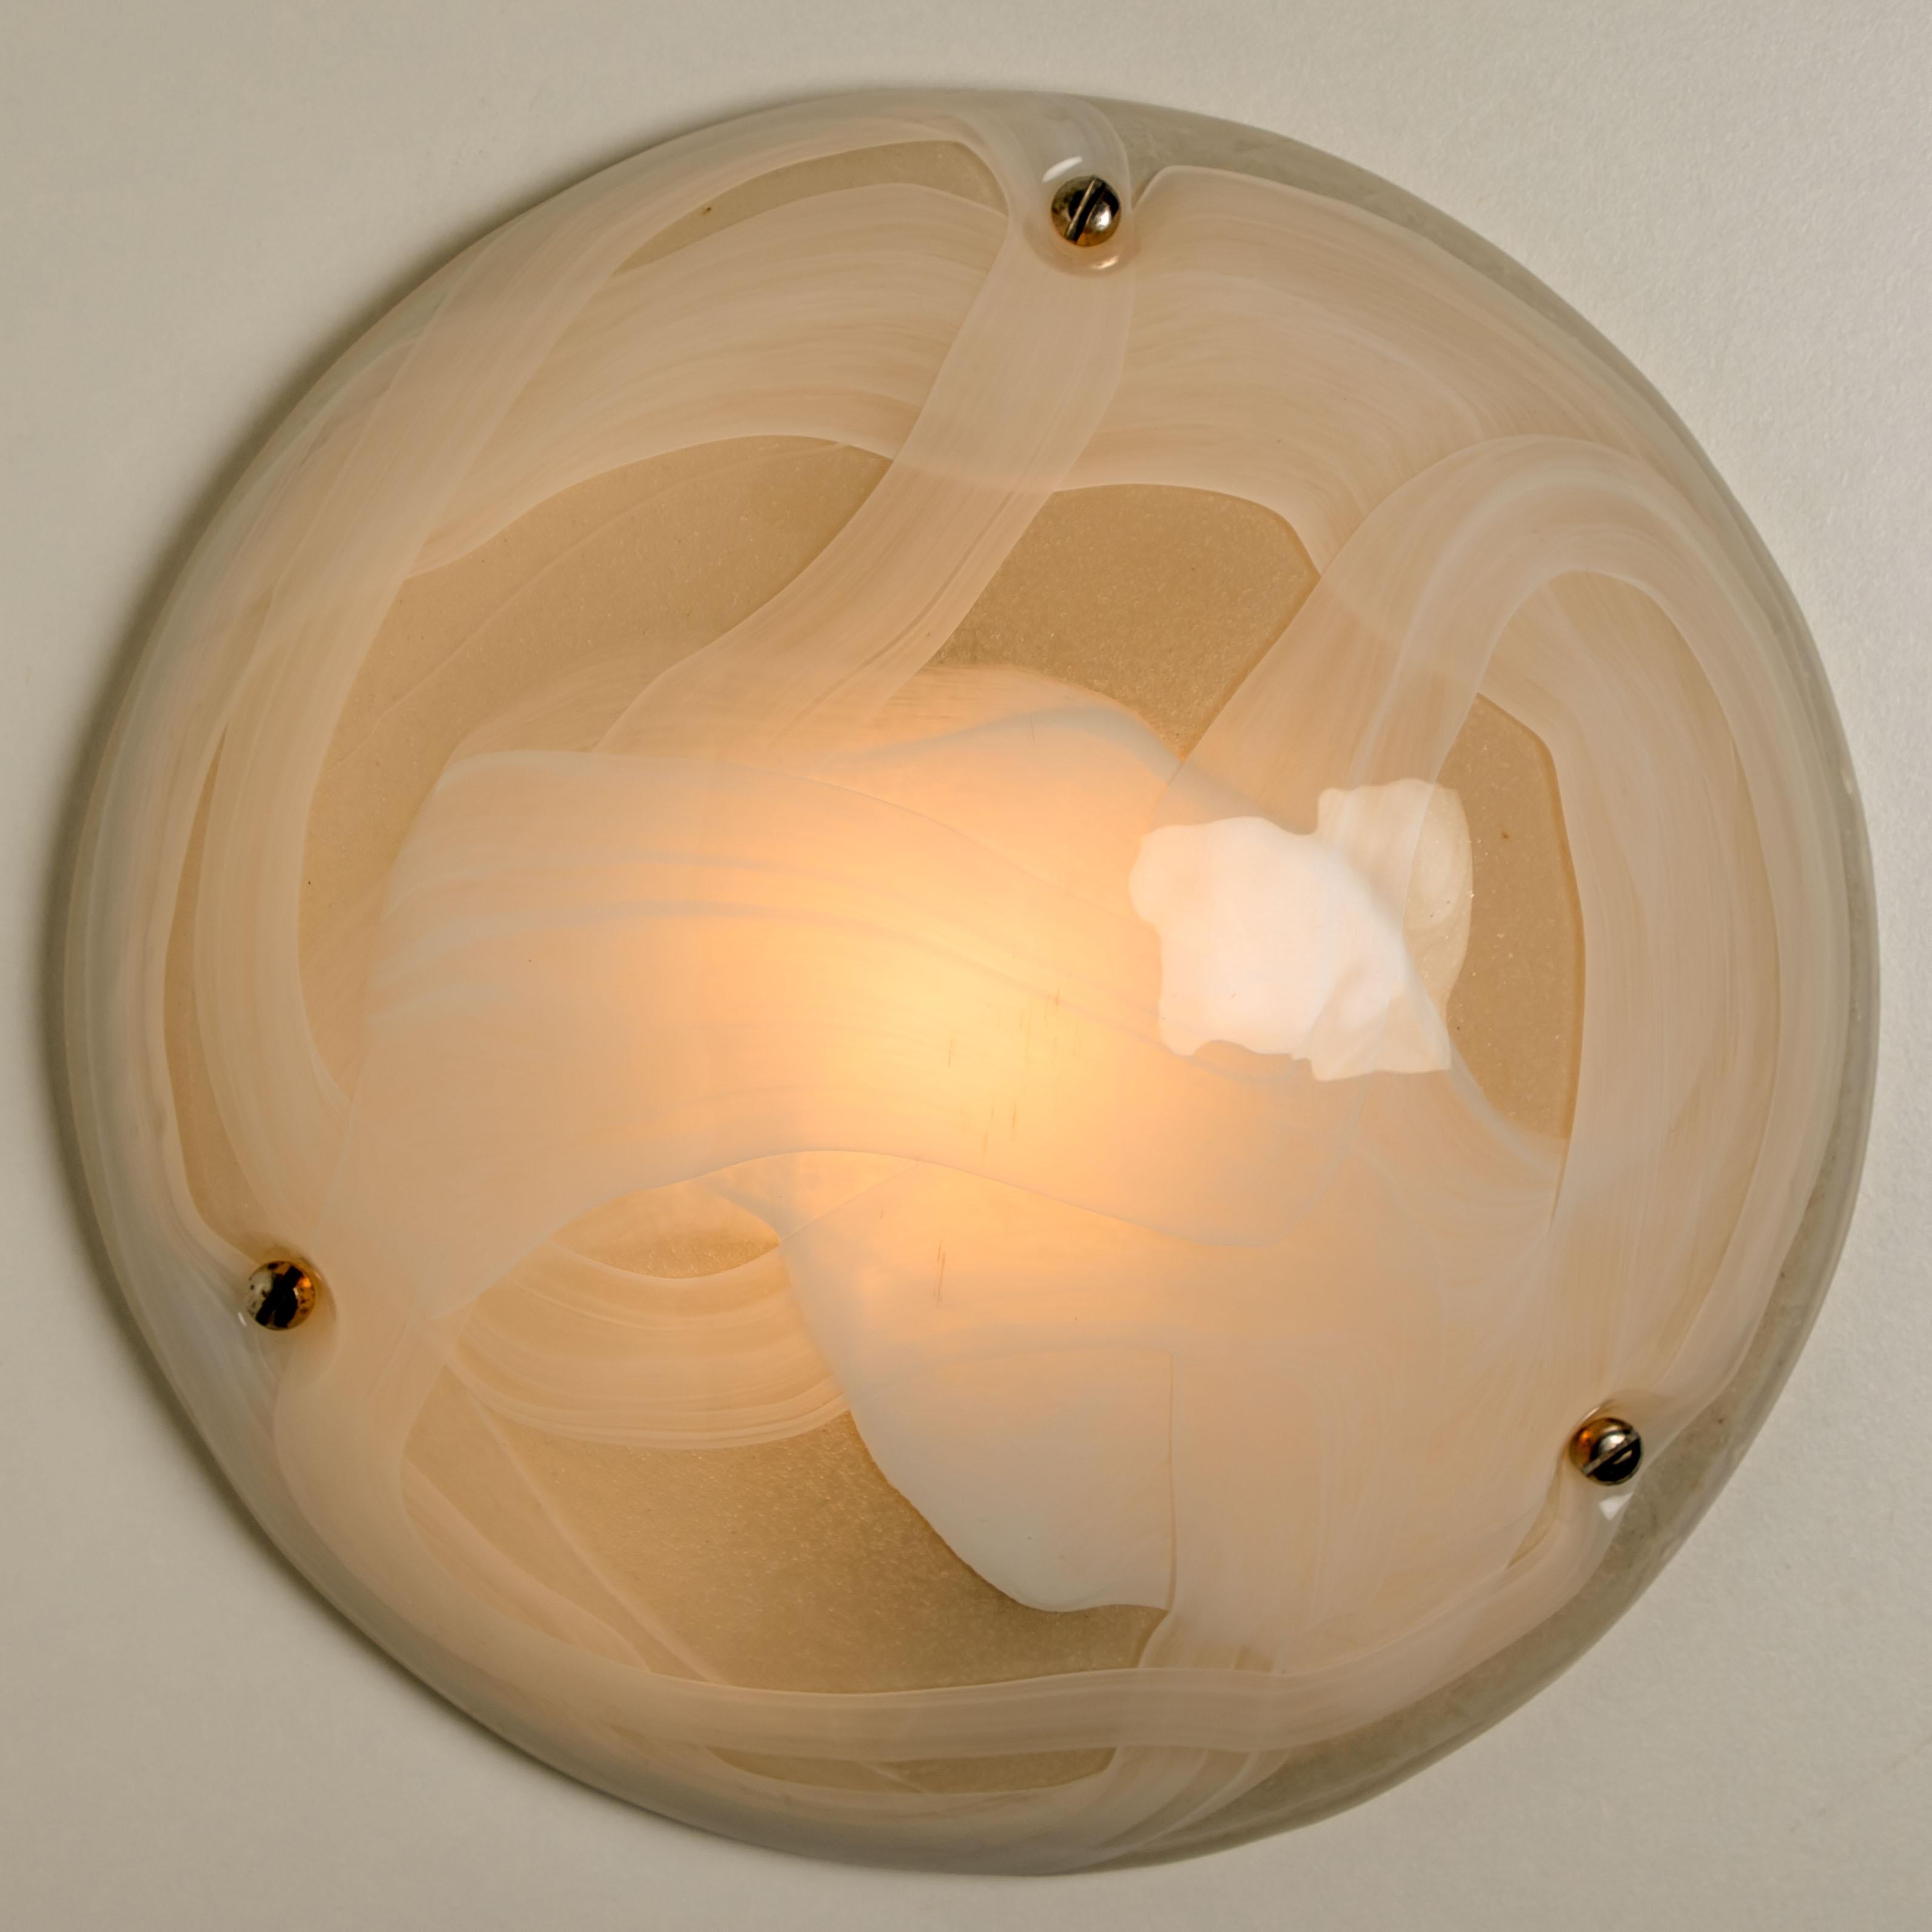 High-end murano glass wall lights or flush mount. The brass ring holds a large heavy blown glass with three brass brackets. The think glass has a beautiful textured structure. With clear and milky-white glass and white back plate. Beautiful